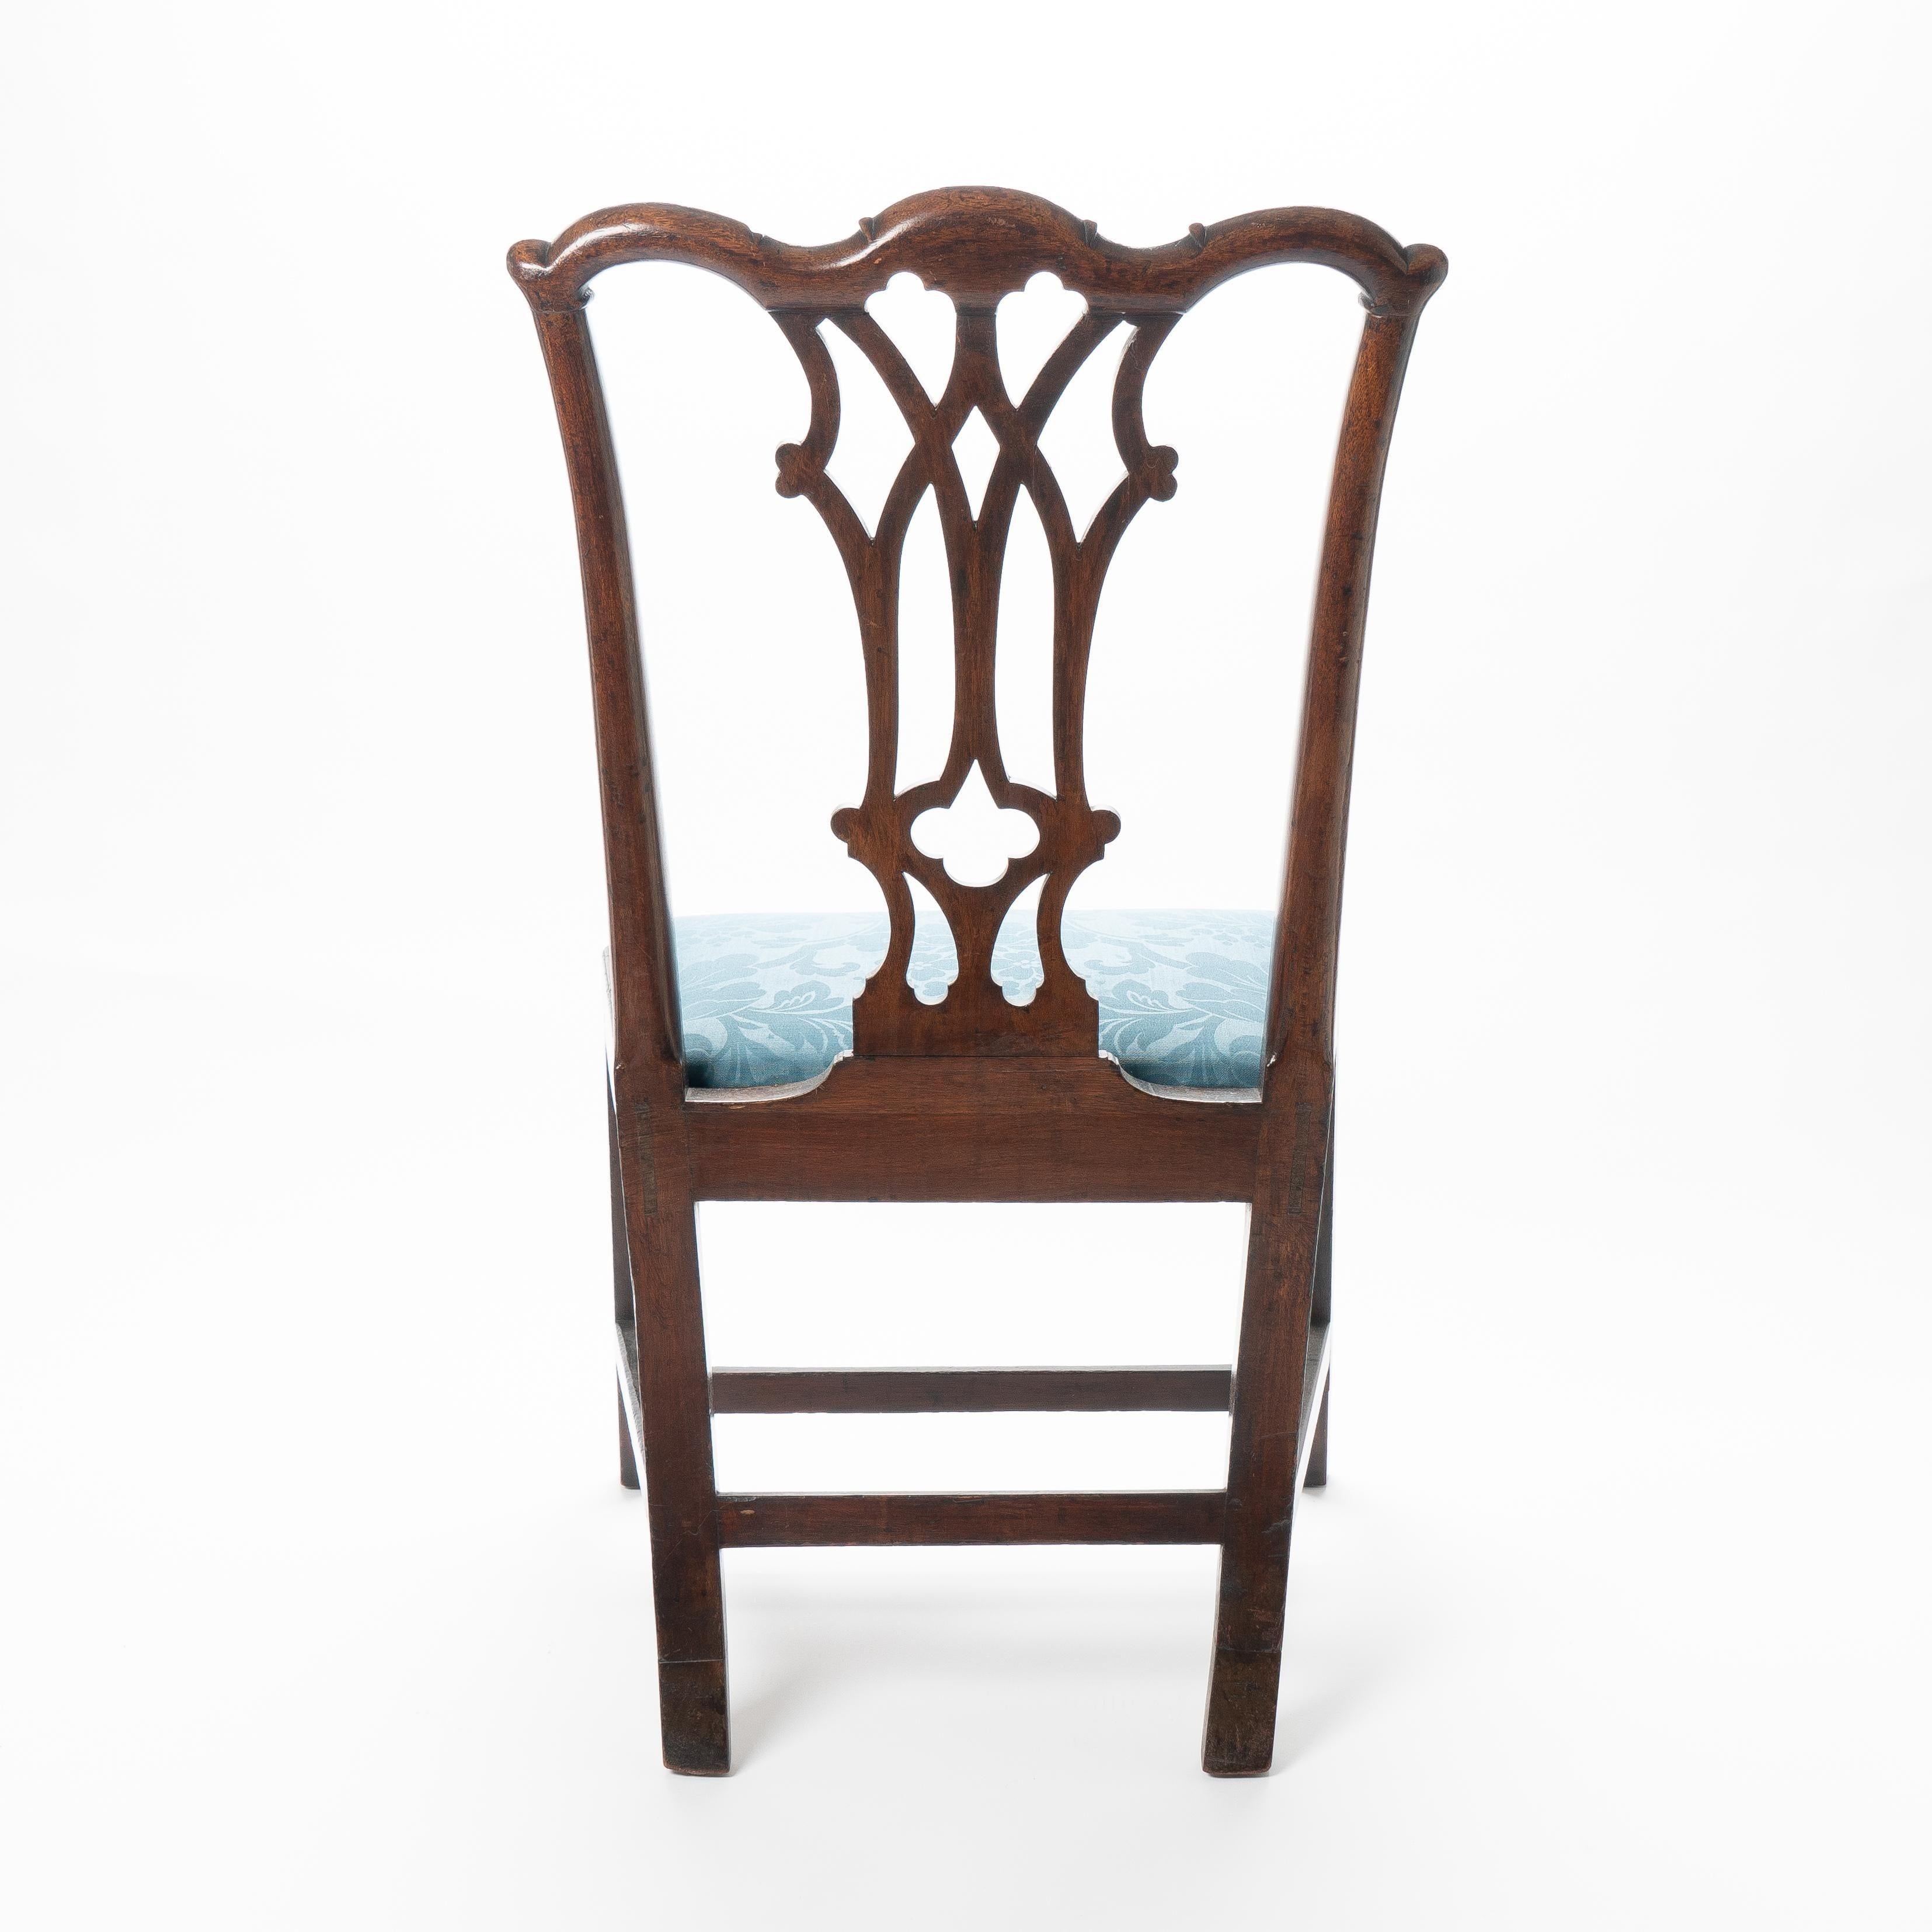 Late 18th Century American Chippendale Mahogany Slip Seat Side Chair by Thomas Tuft